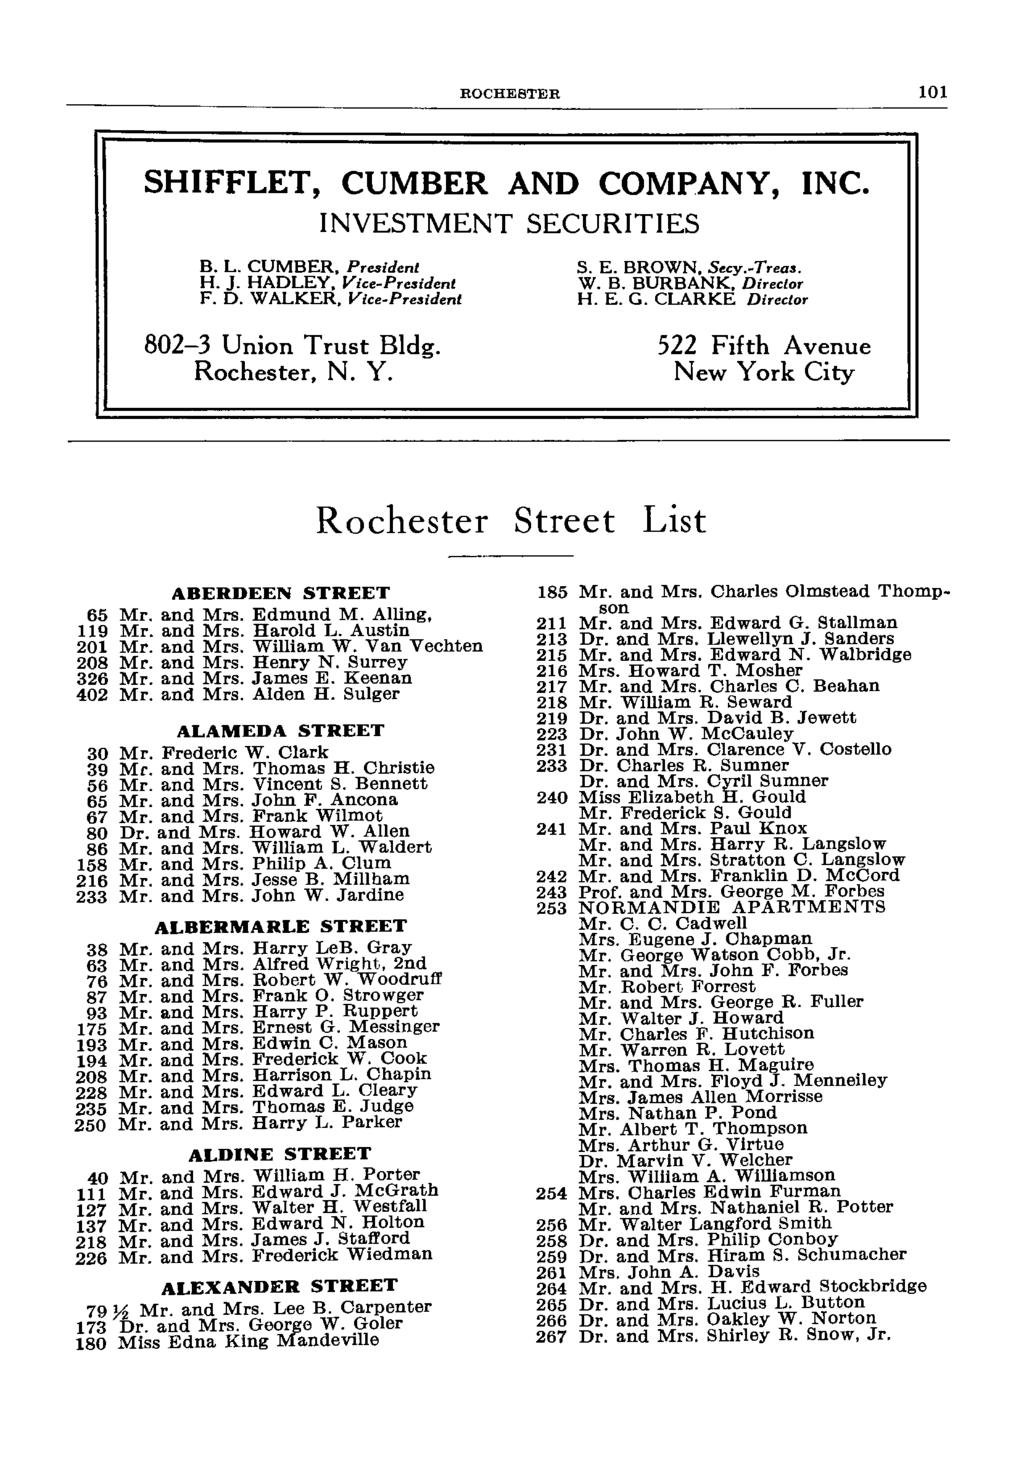 ROCHESTER SHIFFLET, CUMBER AND COMPANY, INC. INVESTMENT SECURITIES B. L. CUMBER. President H. J. HADLEY. Vice-President F. D. WALKER. Vice-President 802-3 Union Trust Bldg. Rochester, N. Y. S. E.